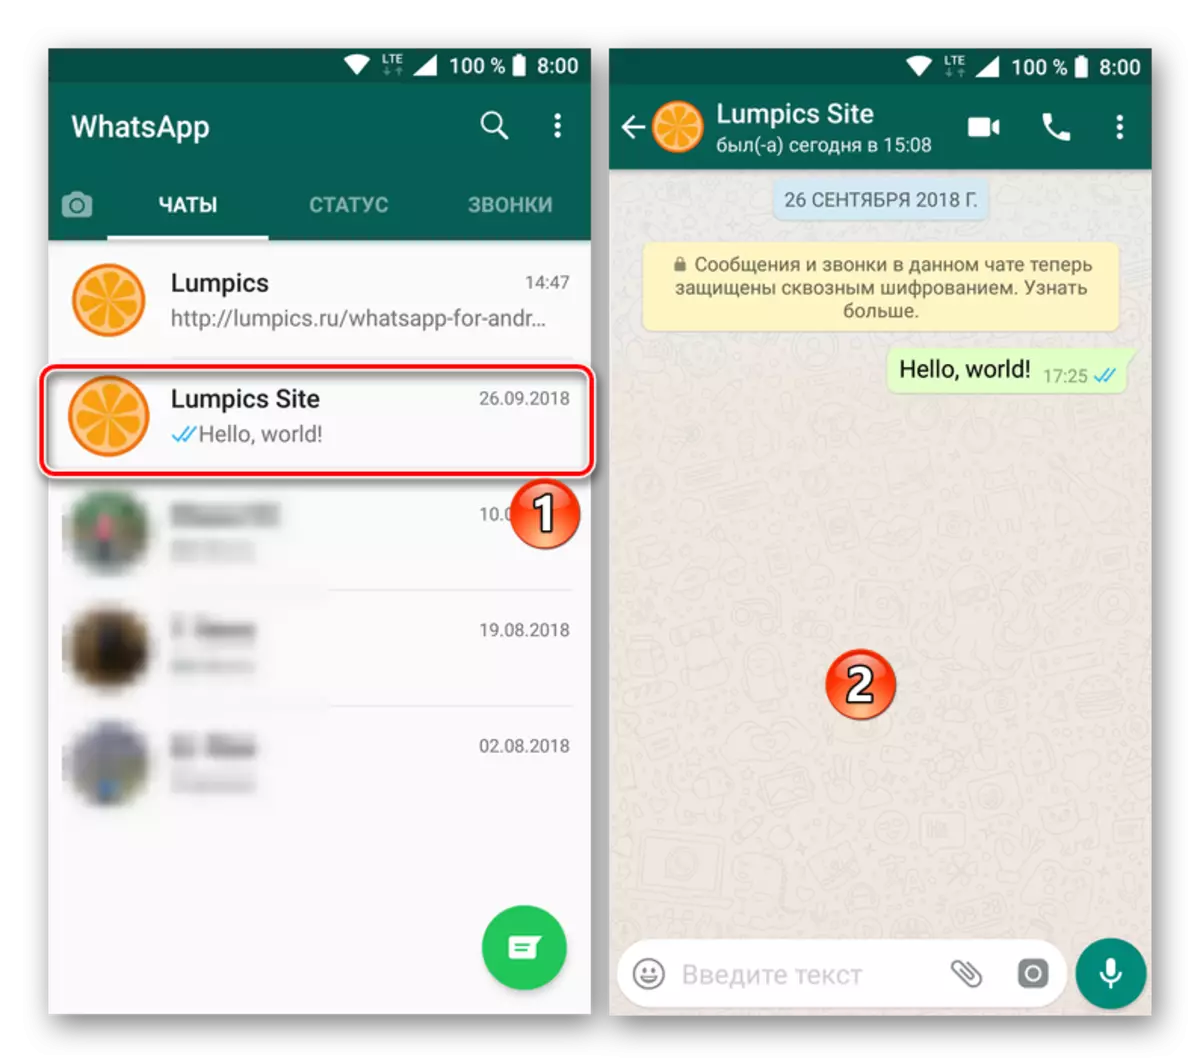 Switch to chat to clean it in WhatsApp Android app